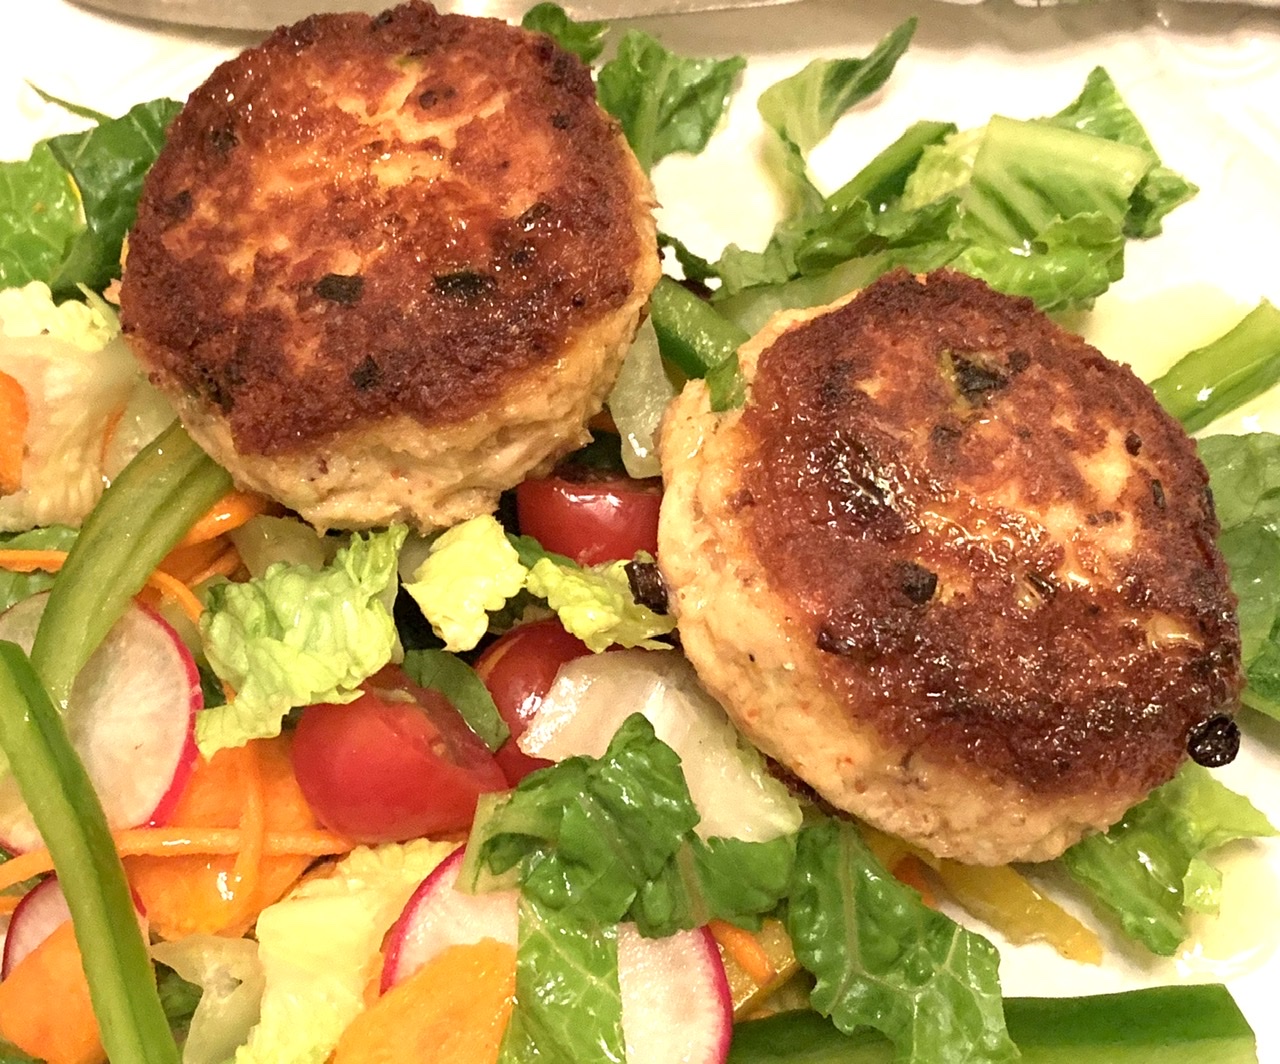 Easy Canned Tuna Cakes – I made these for my Husband’s Birthday!